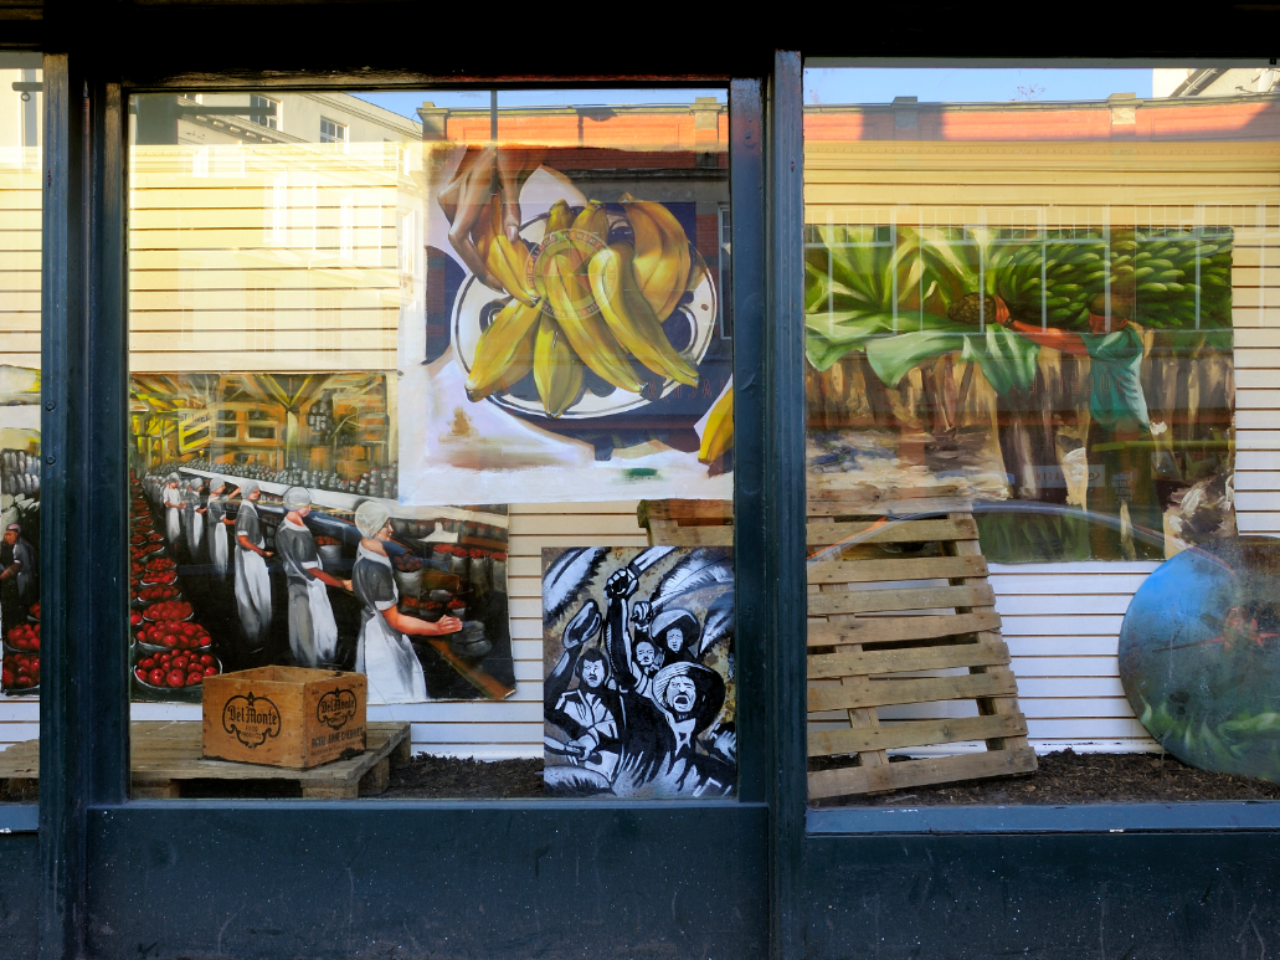 A window display. in the window display is various paintings, large and small, rectangular and circular, there's also wooden pallets in the space.